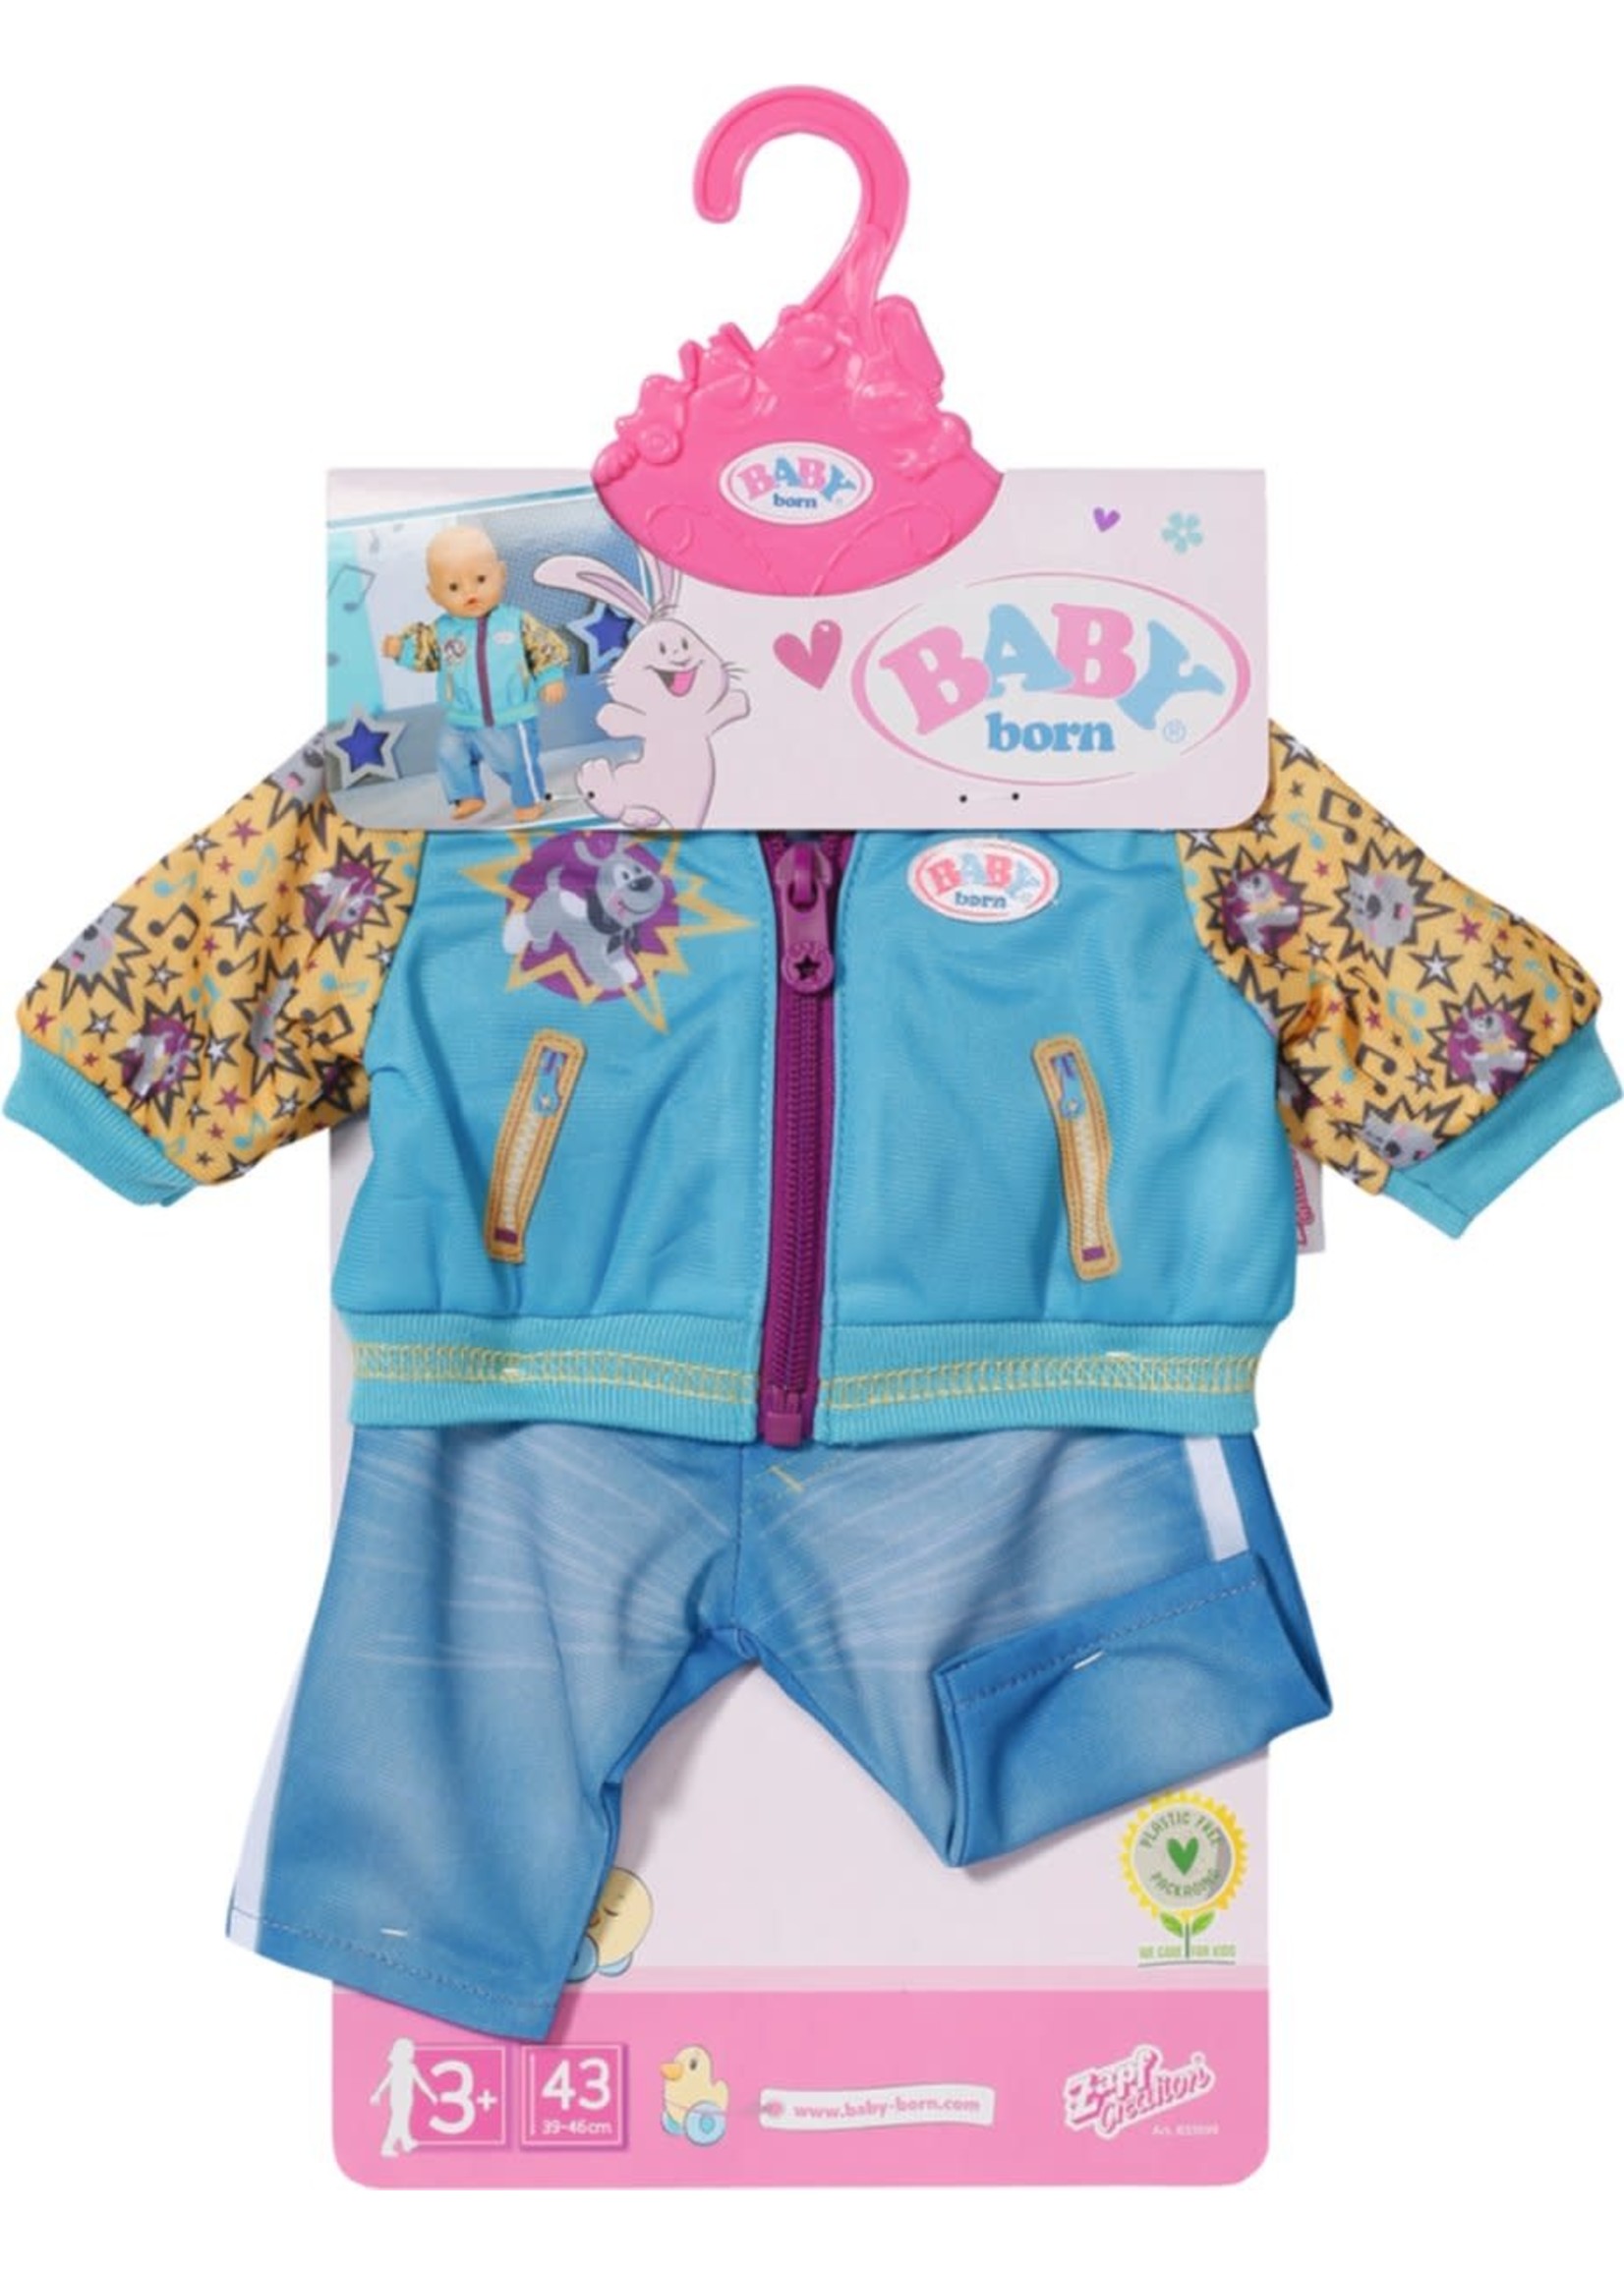 Zapf Creation BABY Born Outfit met Jack (43 cm)